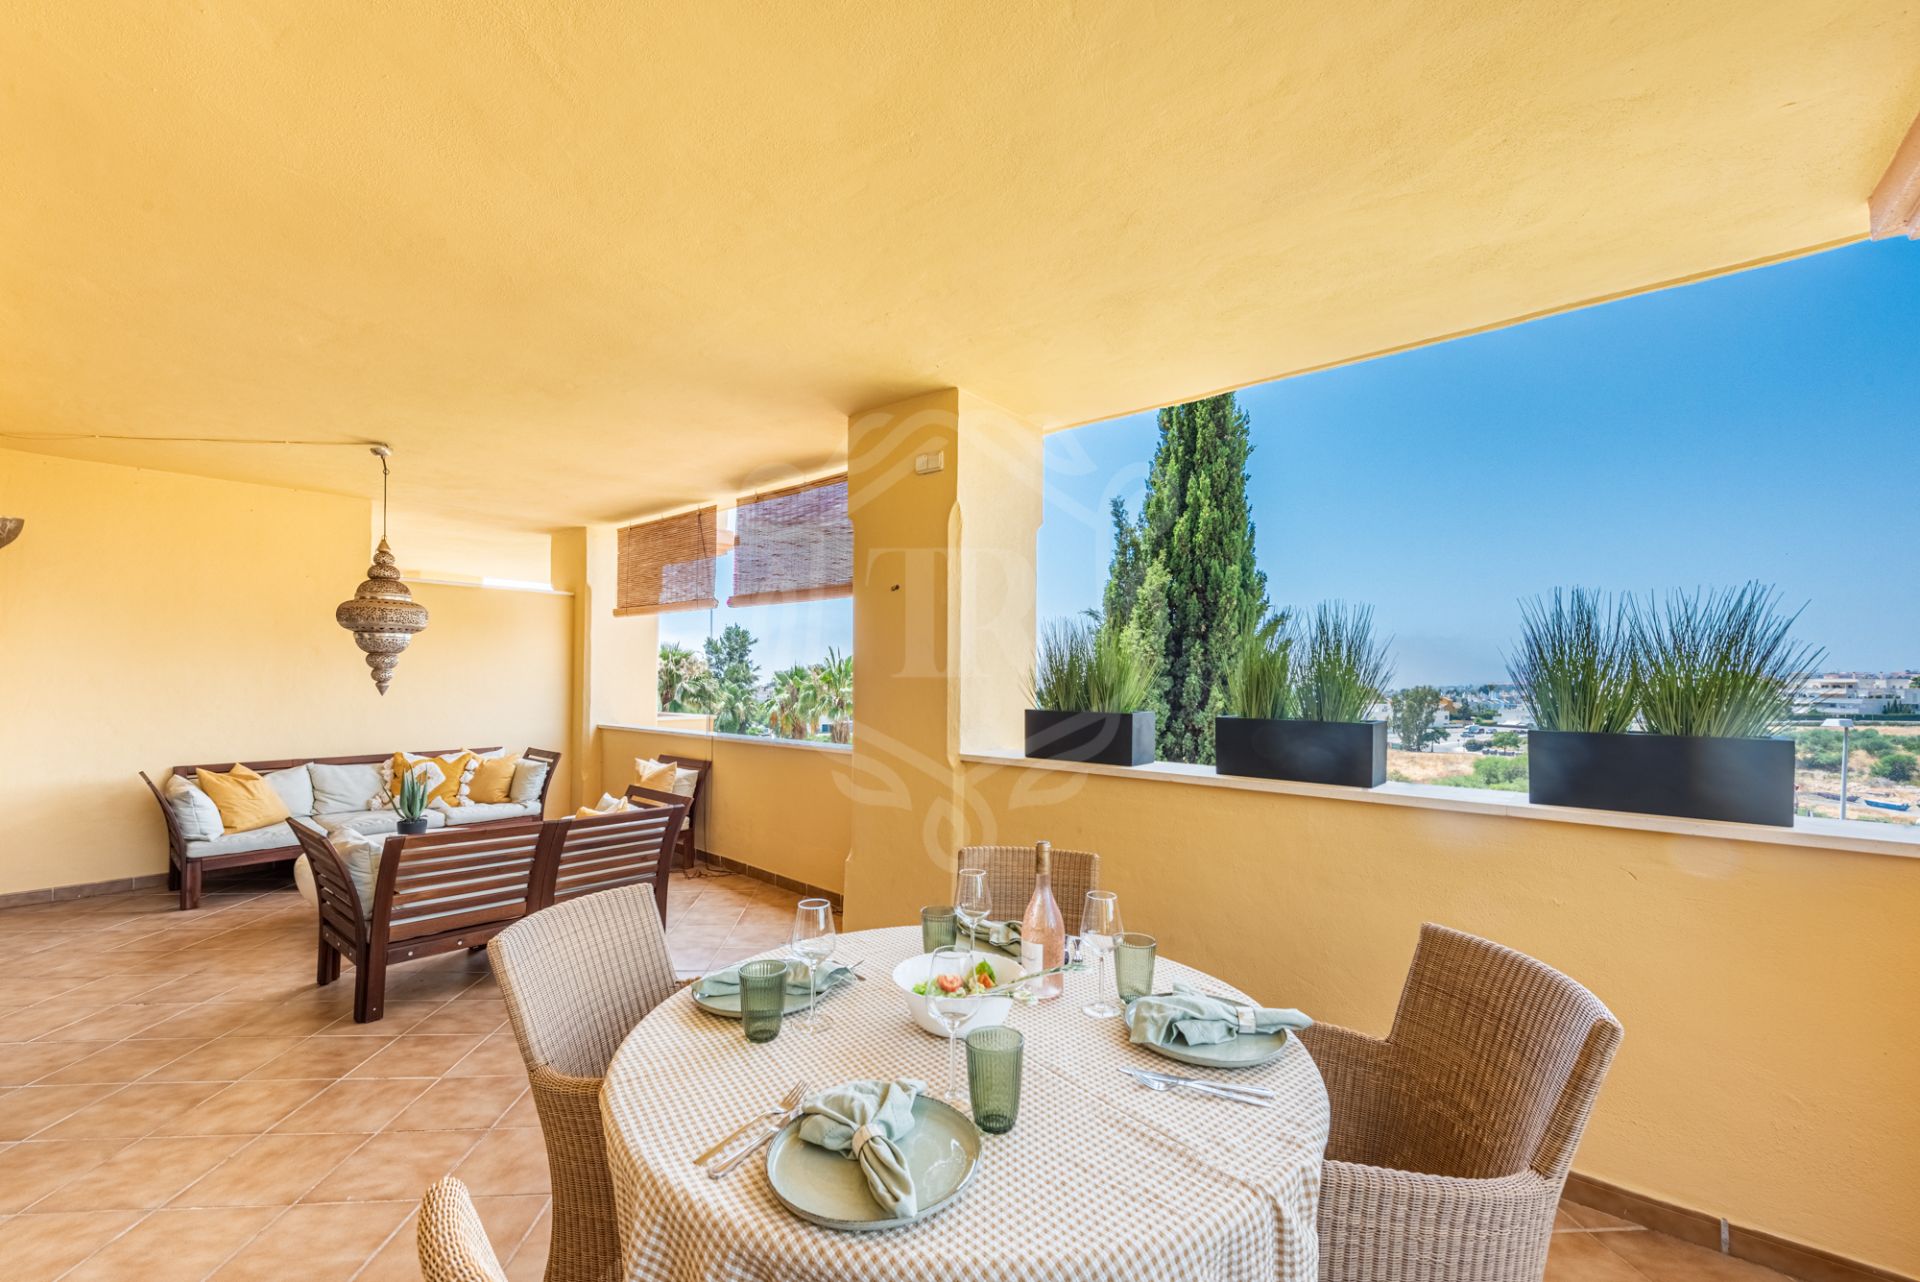 CHEERFUL AND BRIGHT APARTMENT IN EXCELLENT LOCATION, NUEVA ANDALUCIA.